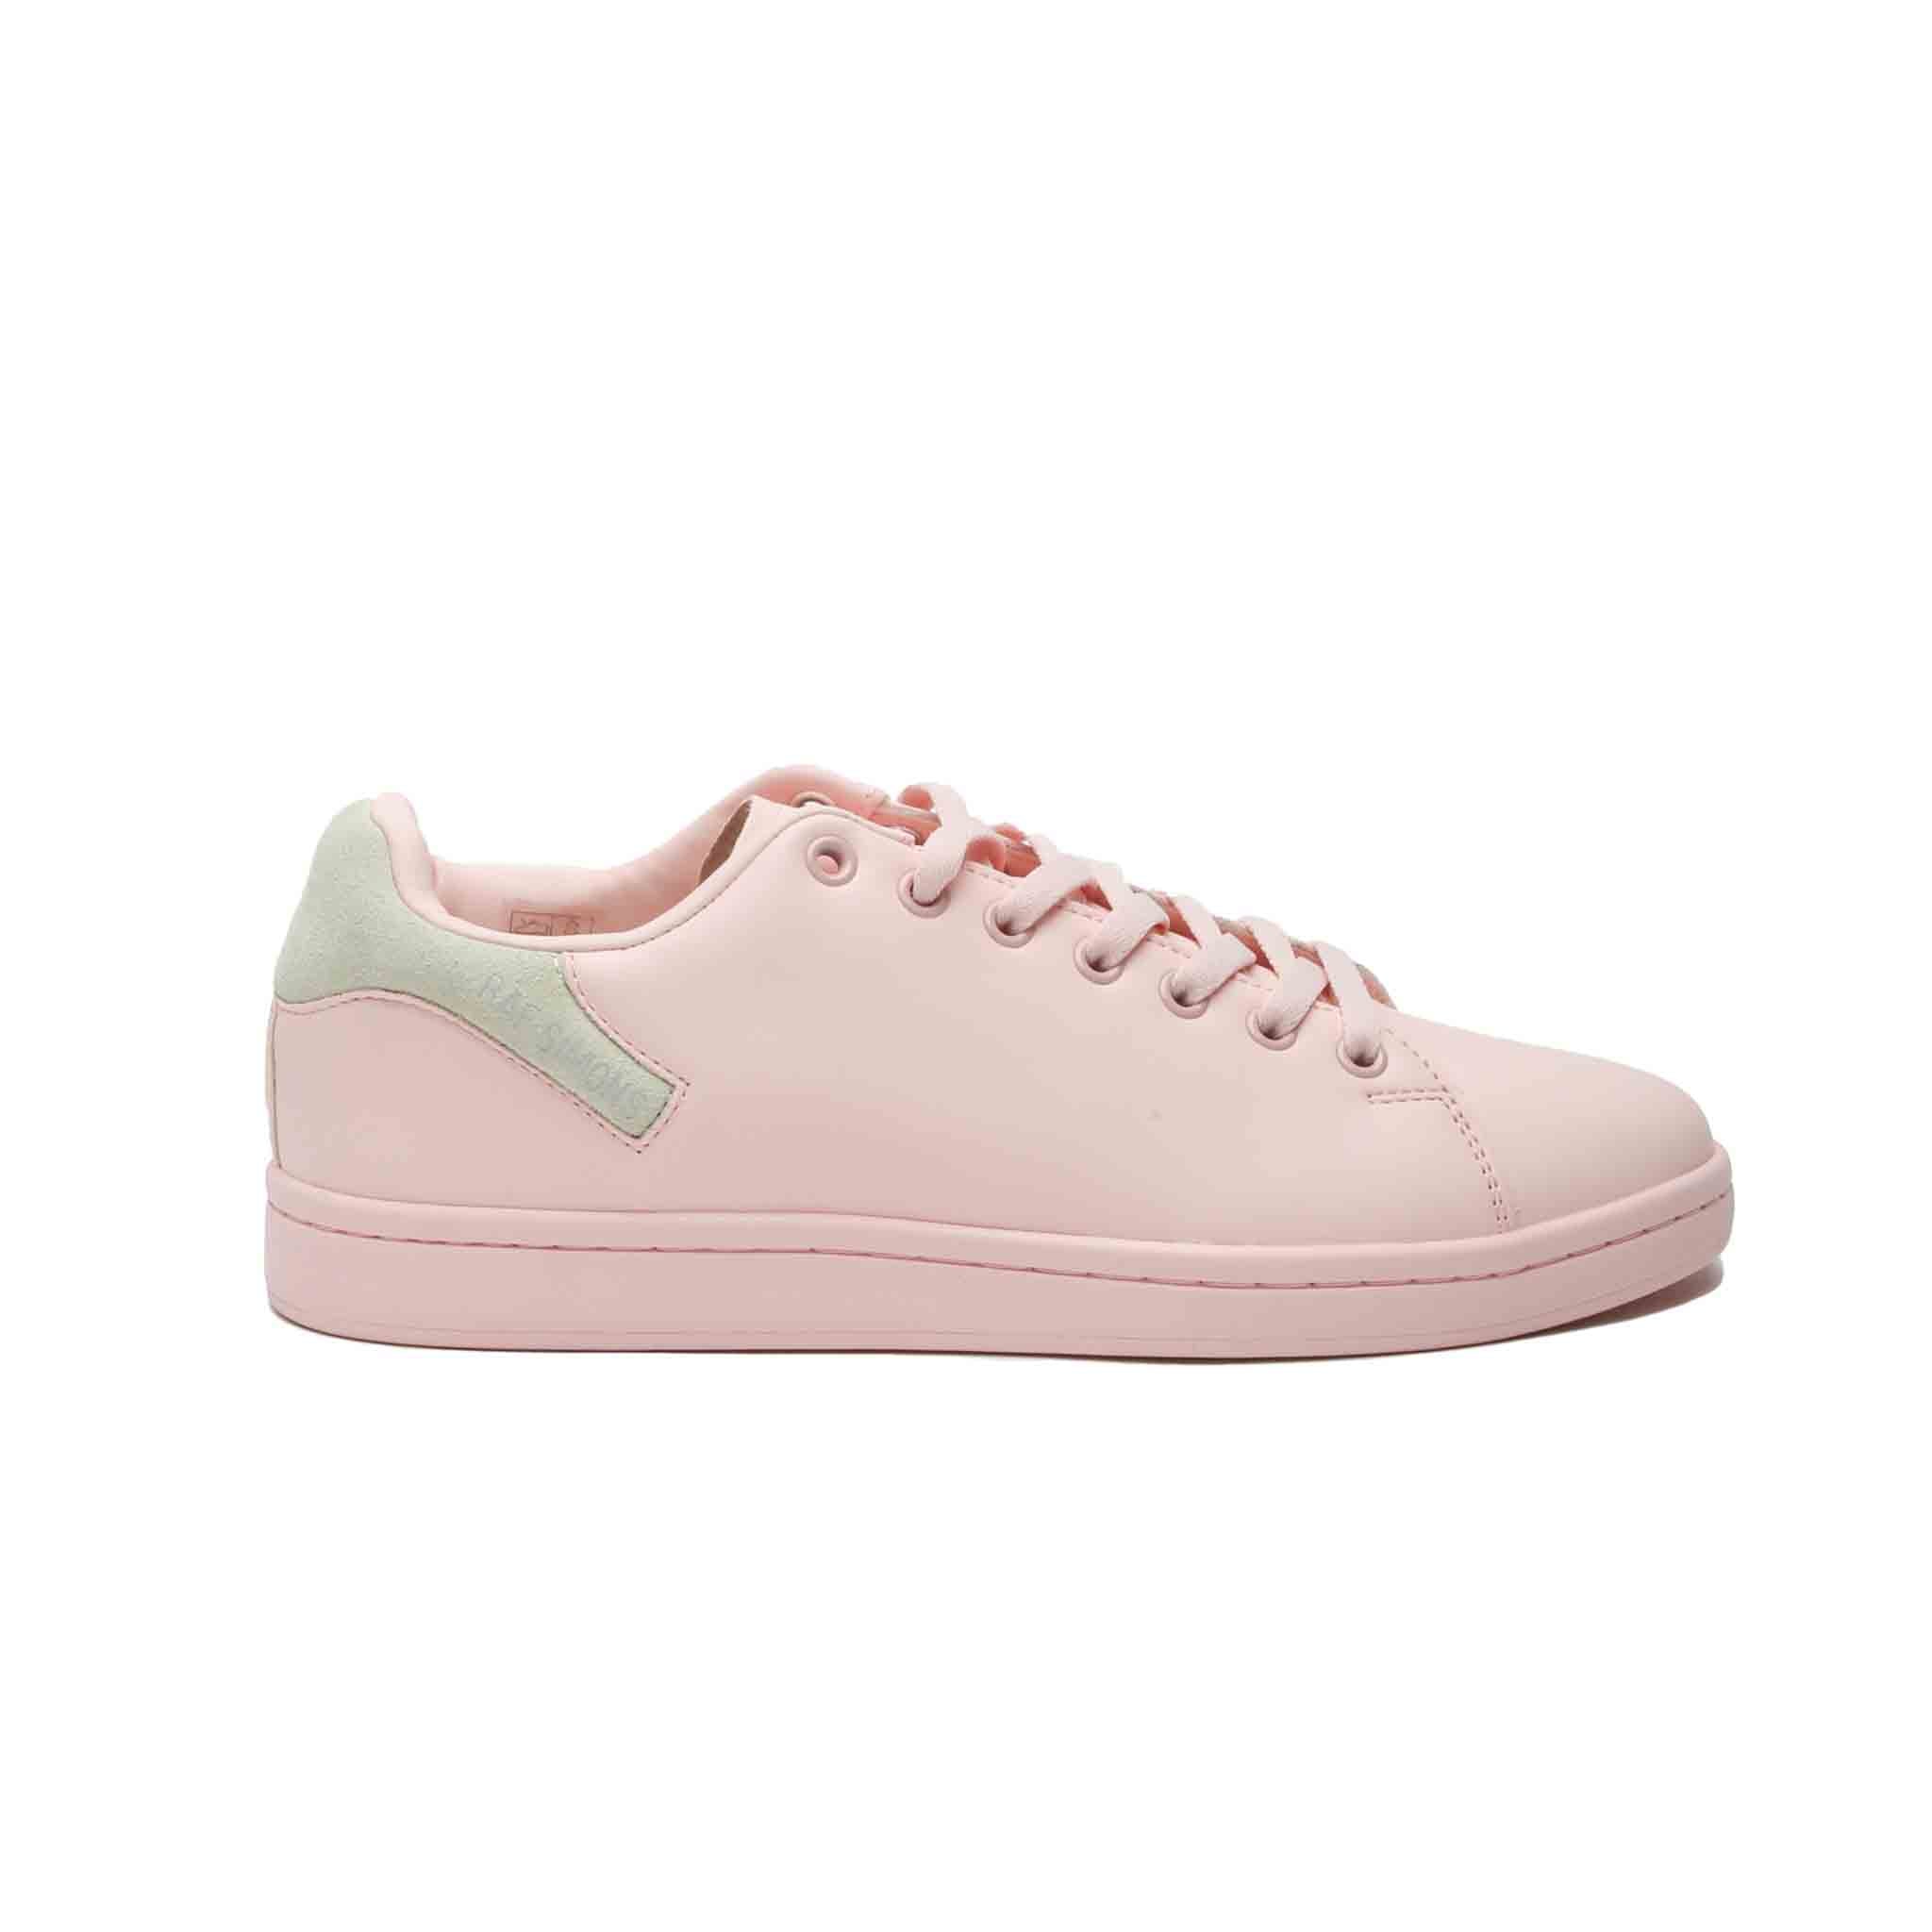 Orion trainers are modelled after classic tennis styles. Made from smooth faux leather and detailed with the brand's lettering across the contrasting heel padding and inner sole.   Product Info:  Laces Round toe Padded heel Small logo detailing Style Code: HR760001S 3119